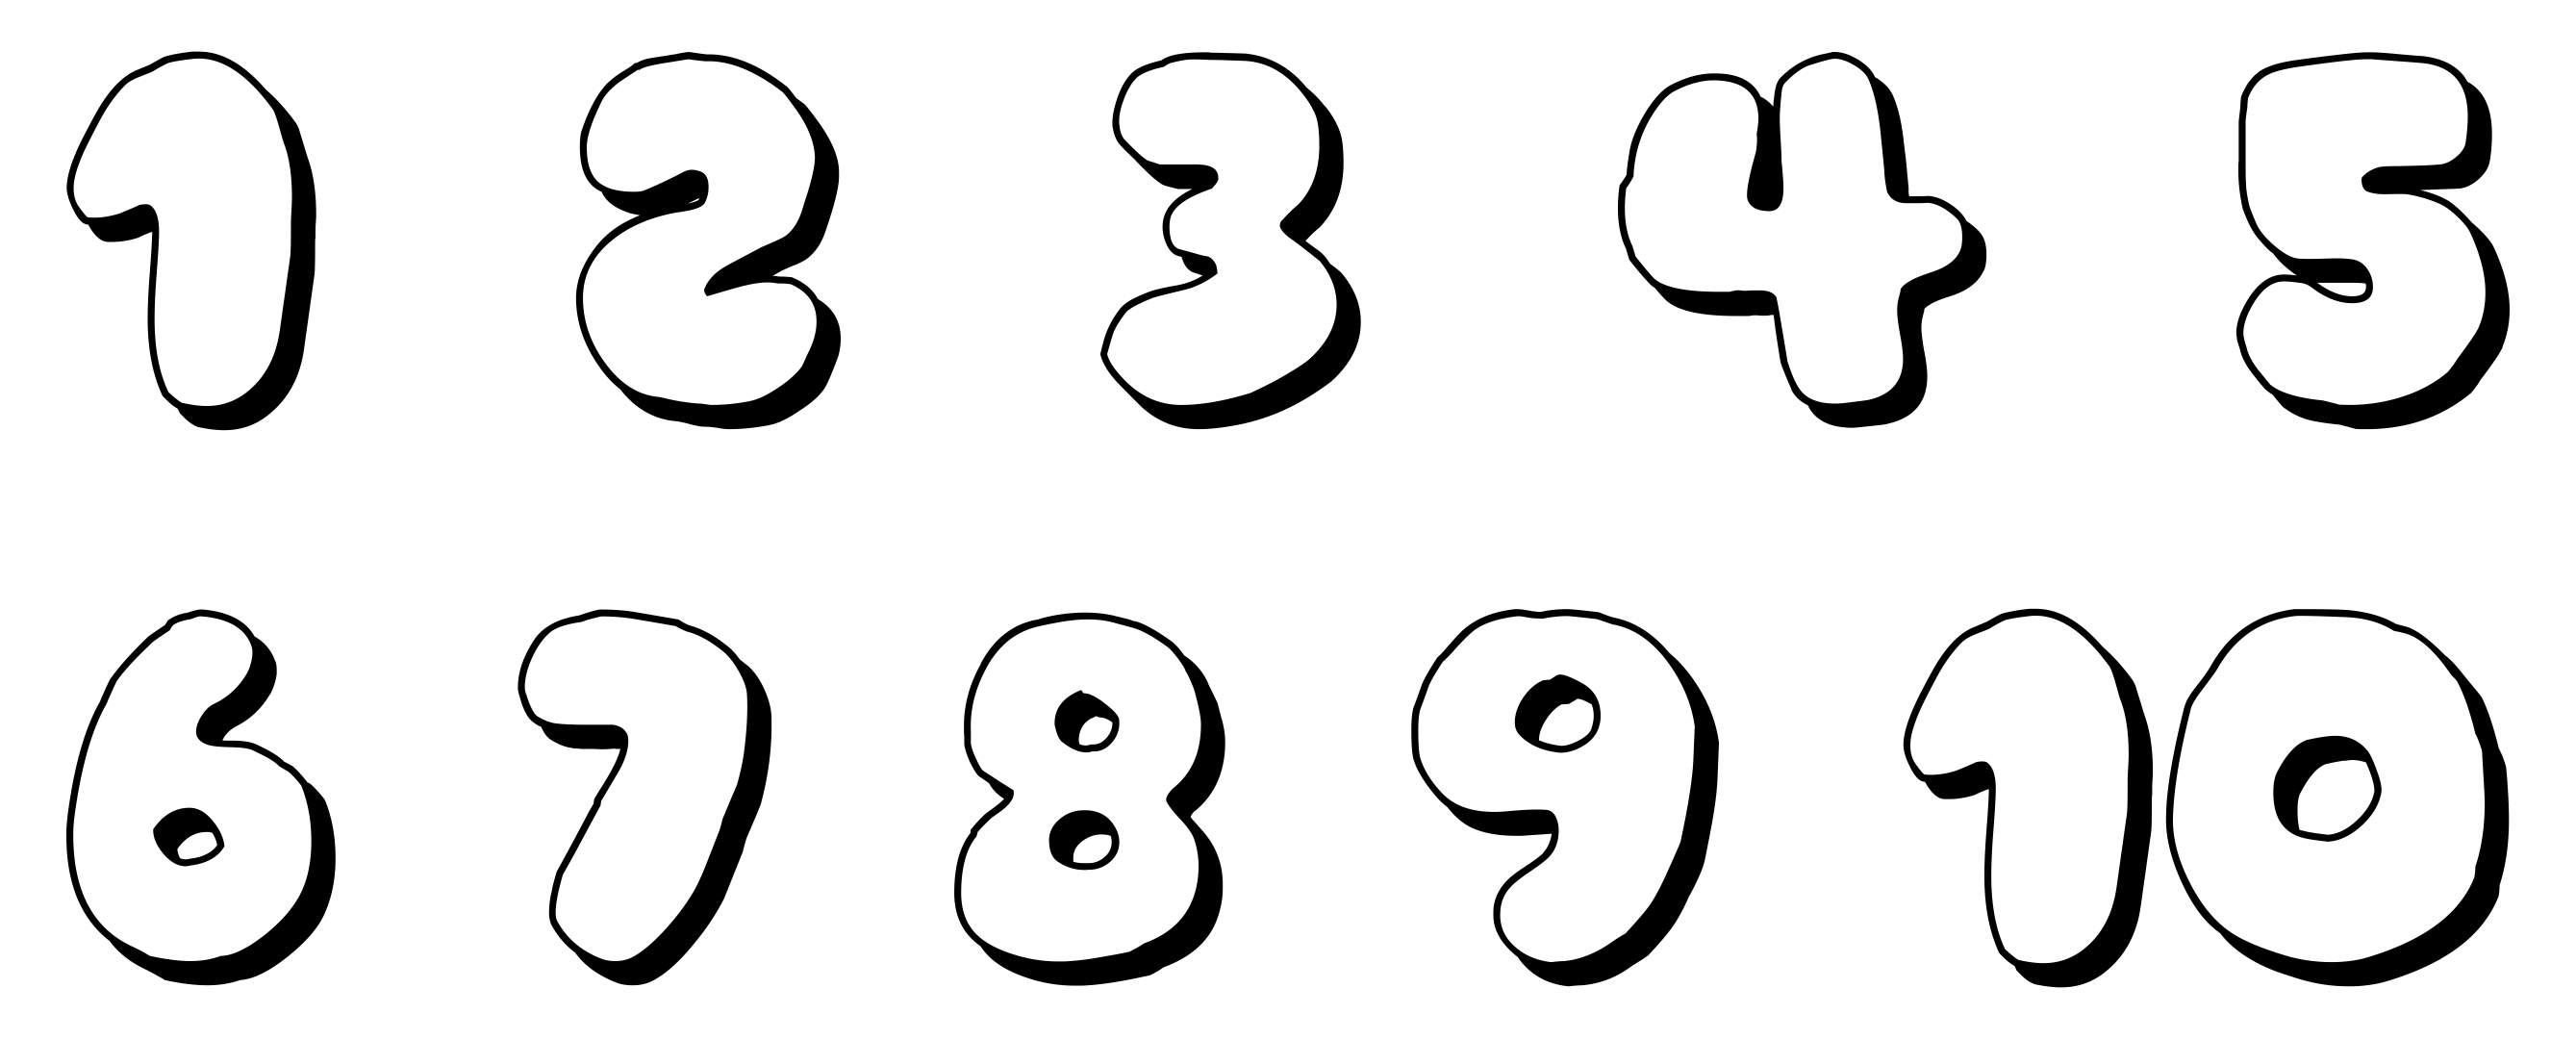 Printable Bubble Numbers.